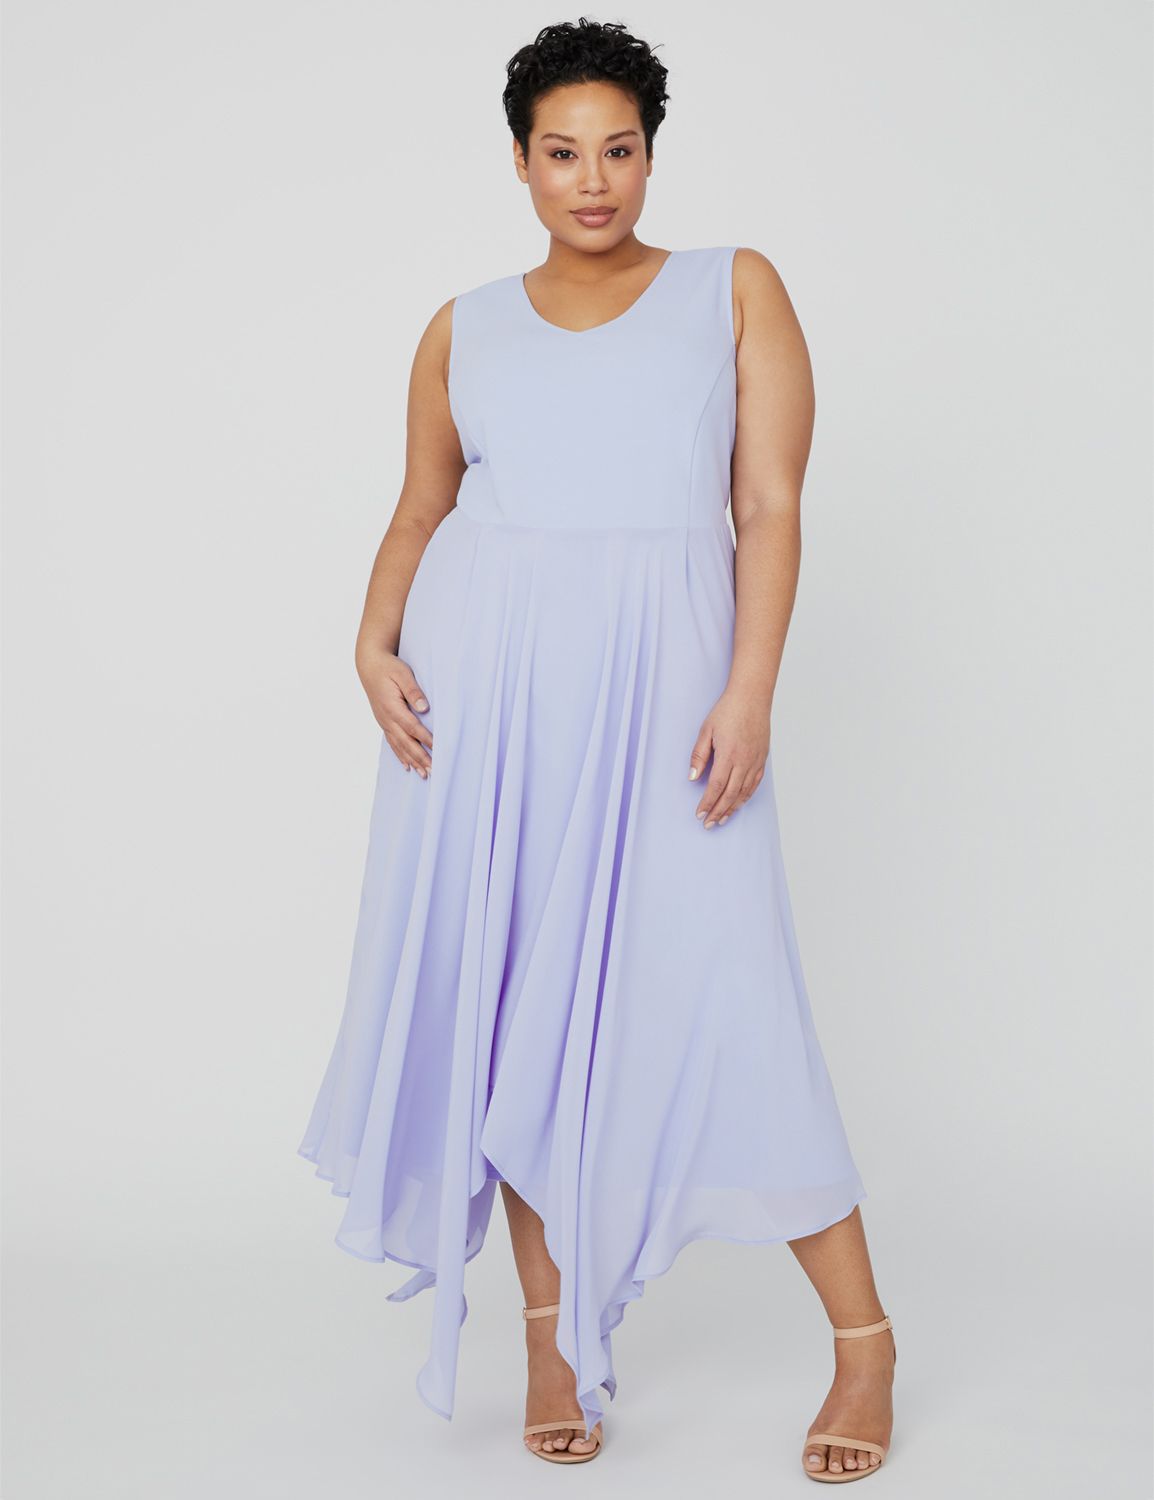 New Arrivals & Styles in Plus Size Fashion | Catherines